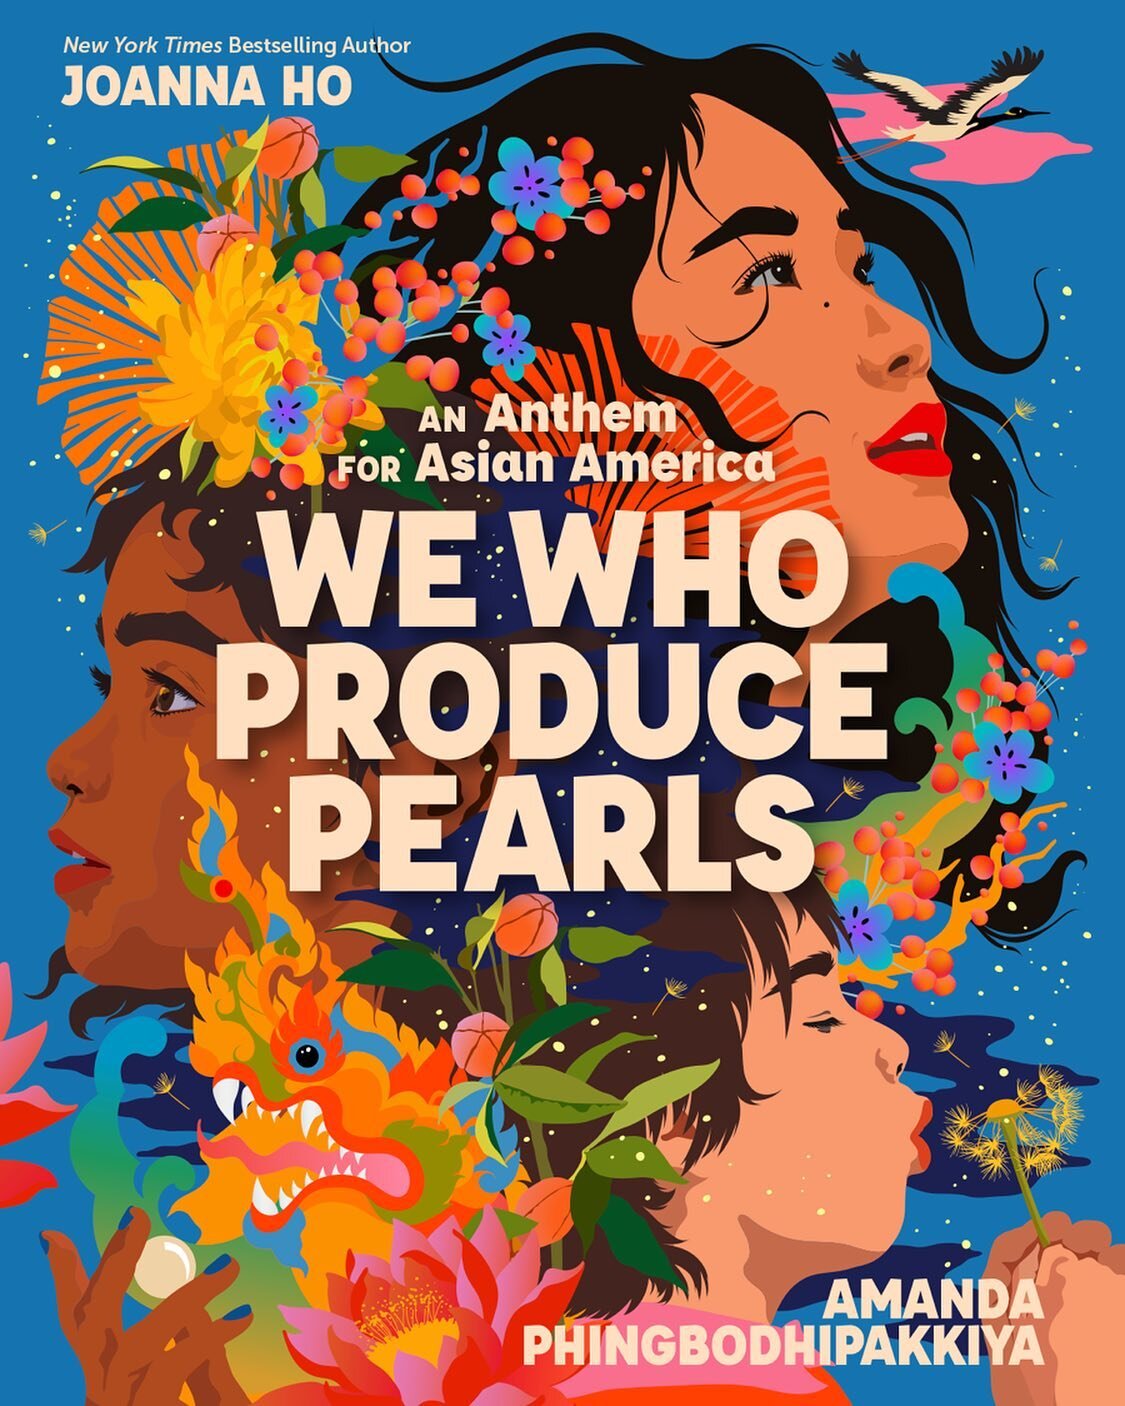 Excited to finally share the cover of what @joannahowrites and I have been working on! Our book, We Who Produce Pearls: An Anthem for Asian America. When I read Joanna&rsquo;s moving and expansive text, that was both poetry and manifesto, full of pos